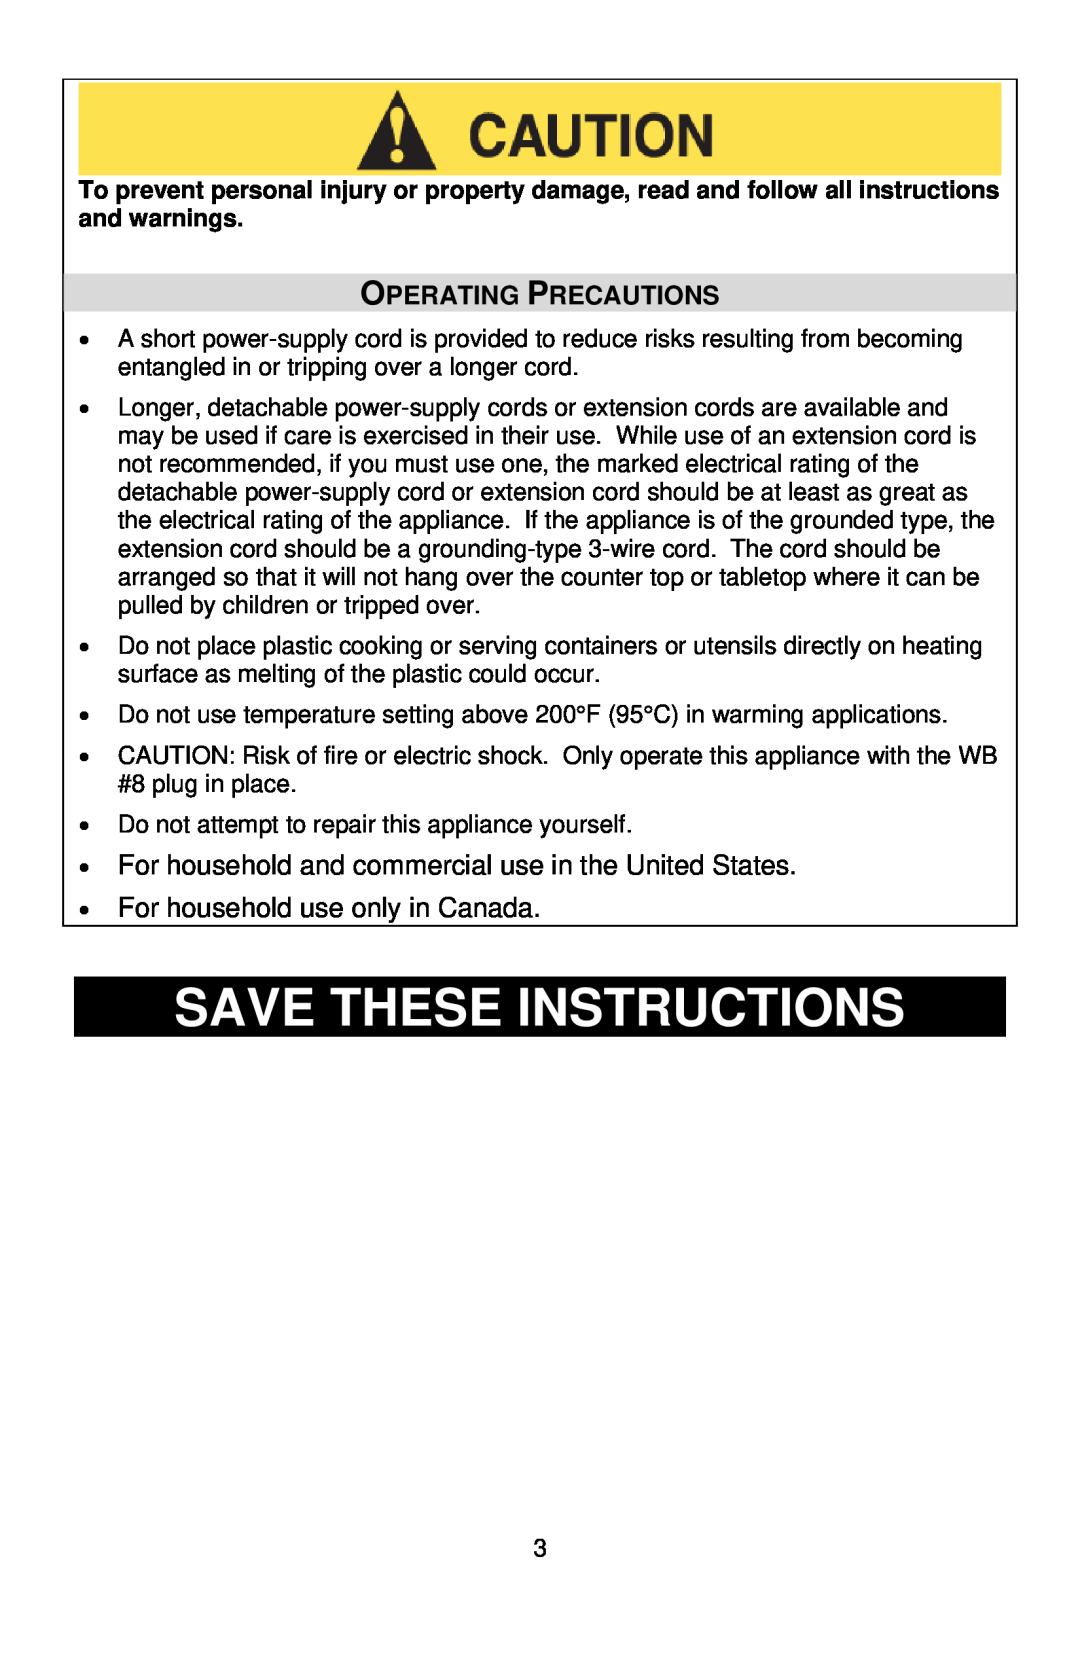 West Bend L5749, PRGD900 Save These Instructions, Operating Precautions, •For household use only in Canada 